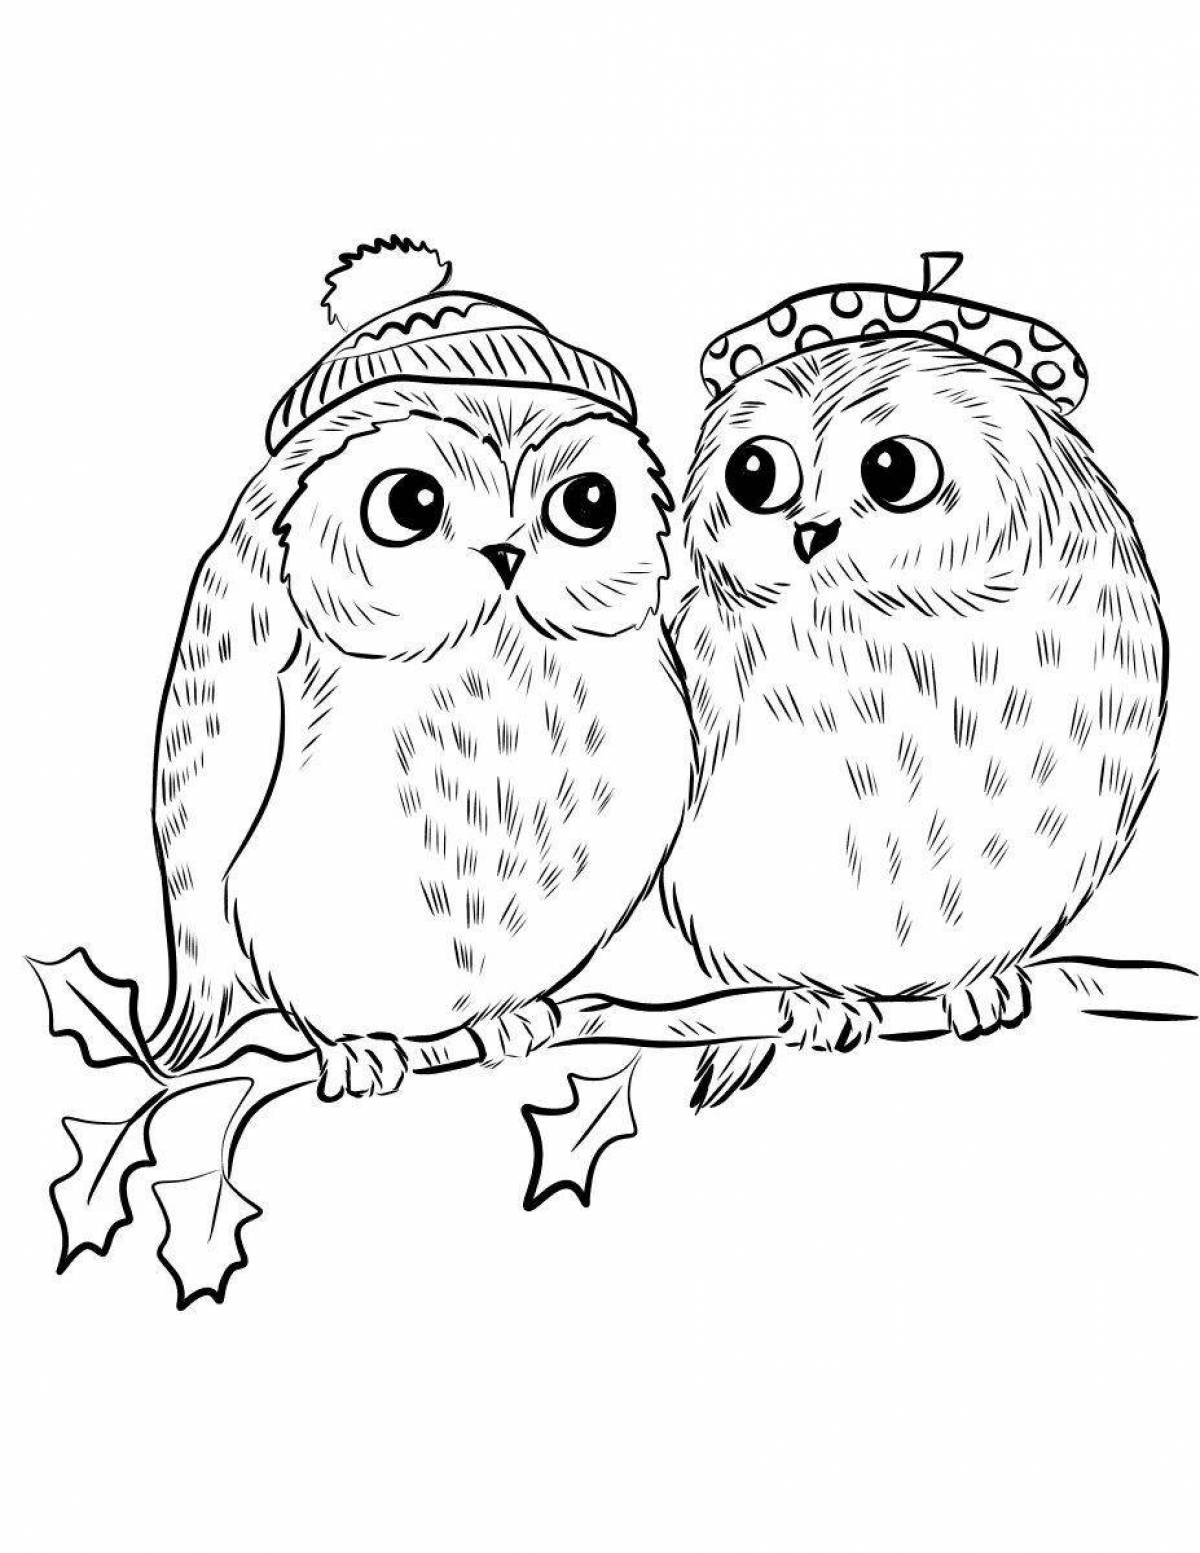 Amazing owl coloring page for kids